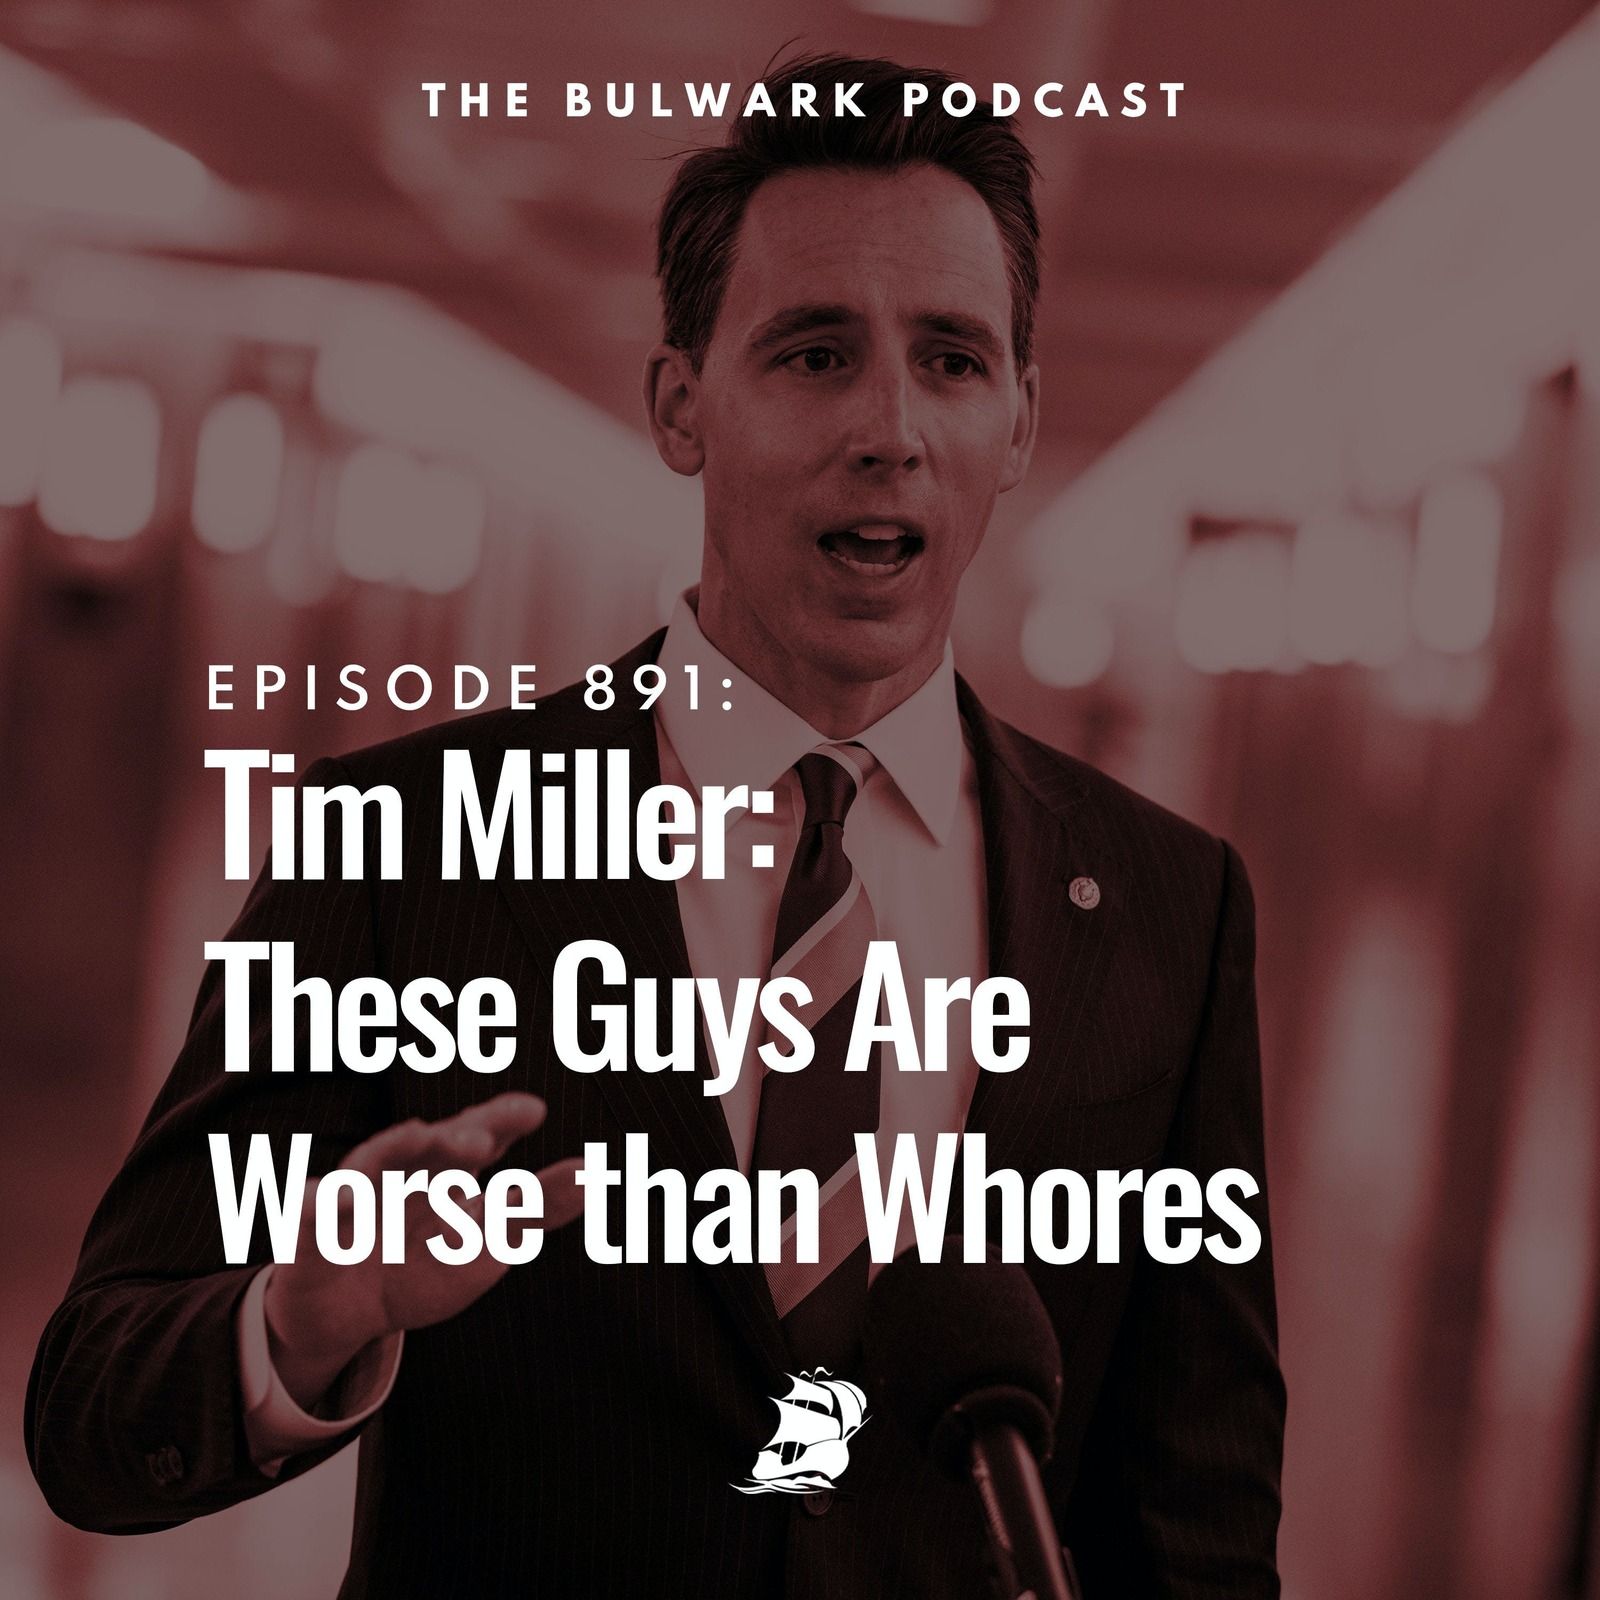 Tim Miller: These Guys Are Worse than Whores by The Bulwark Podcast